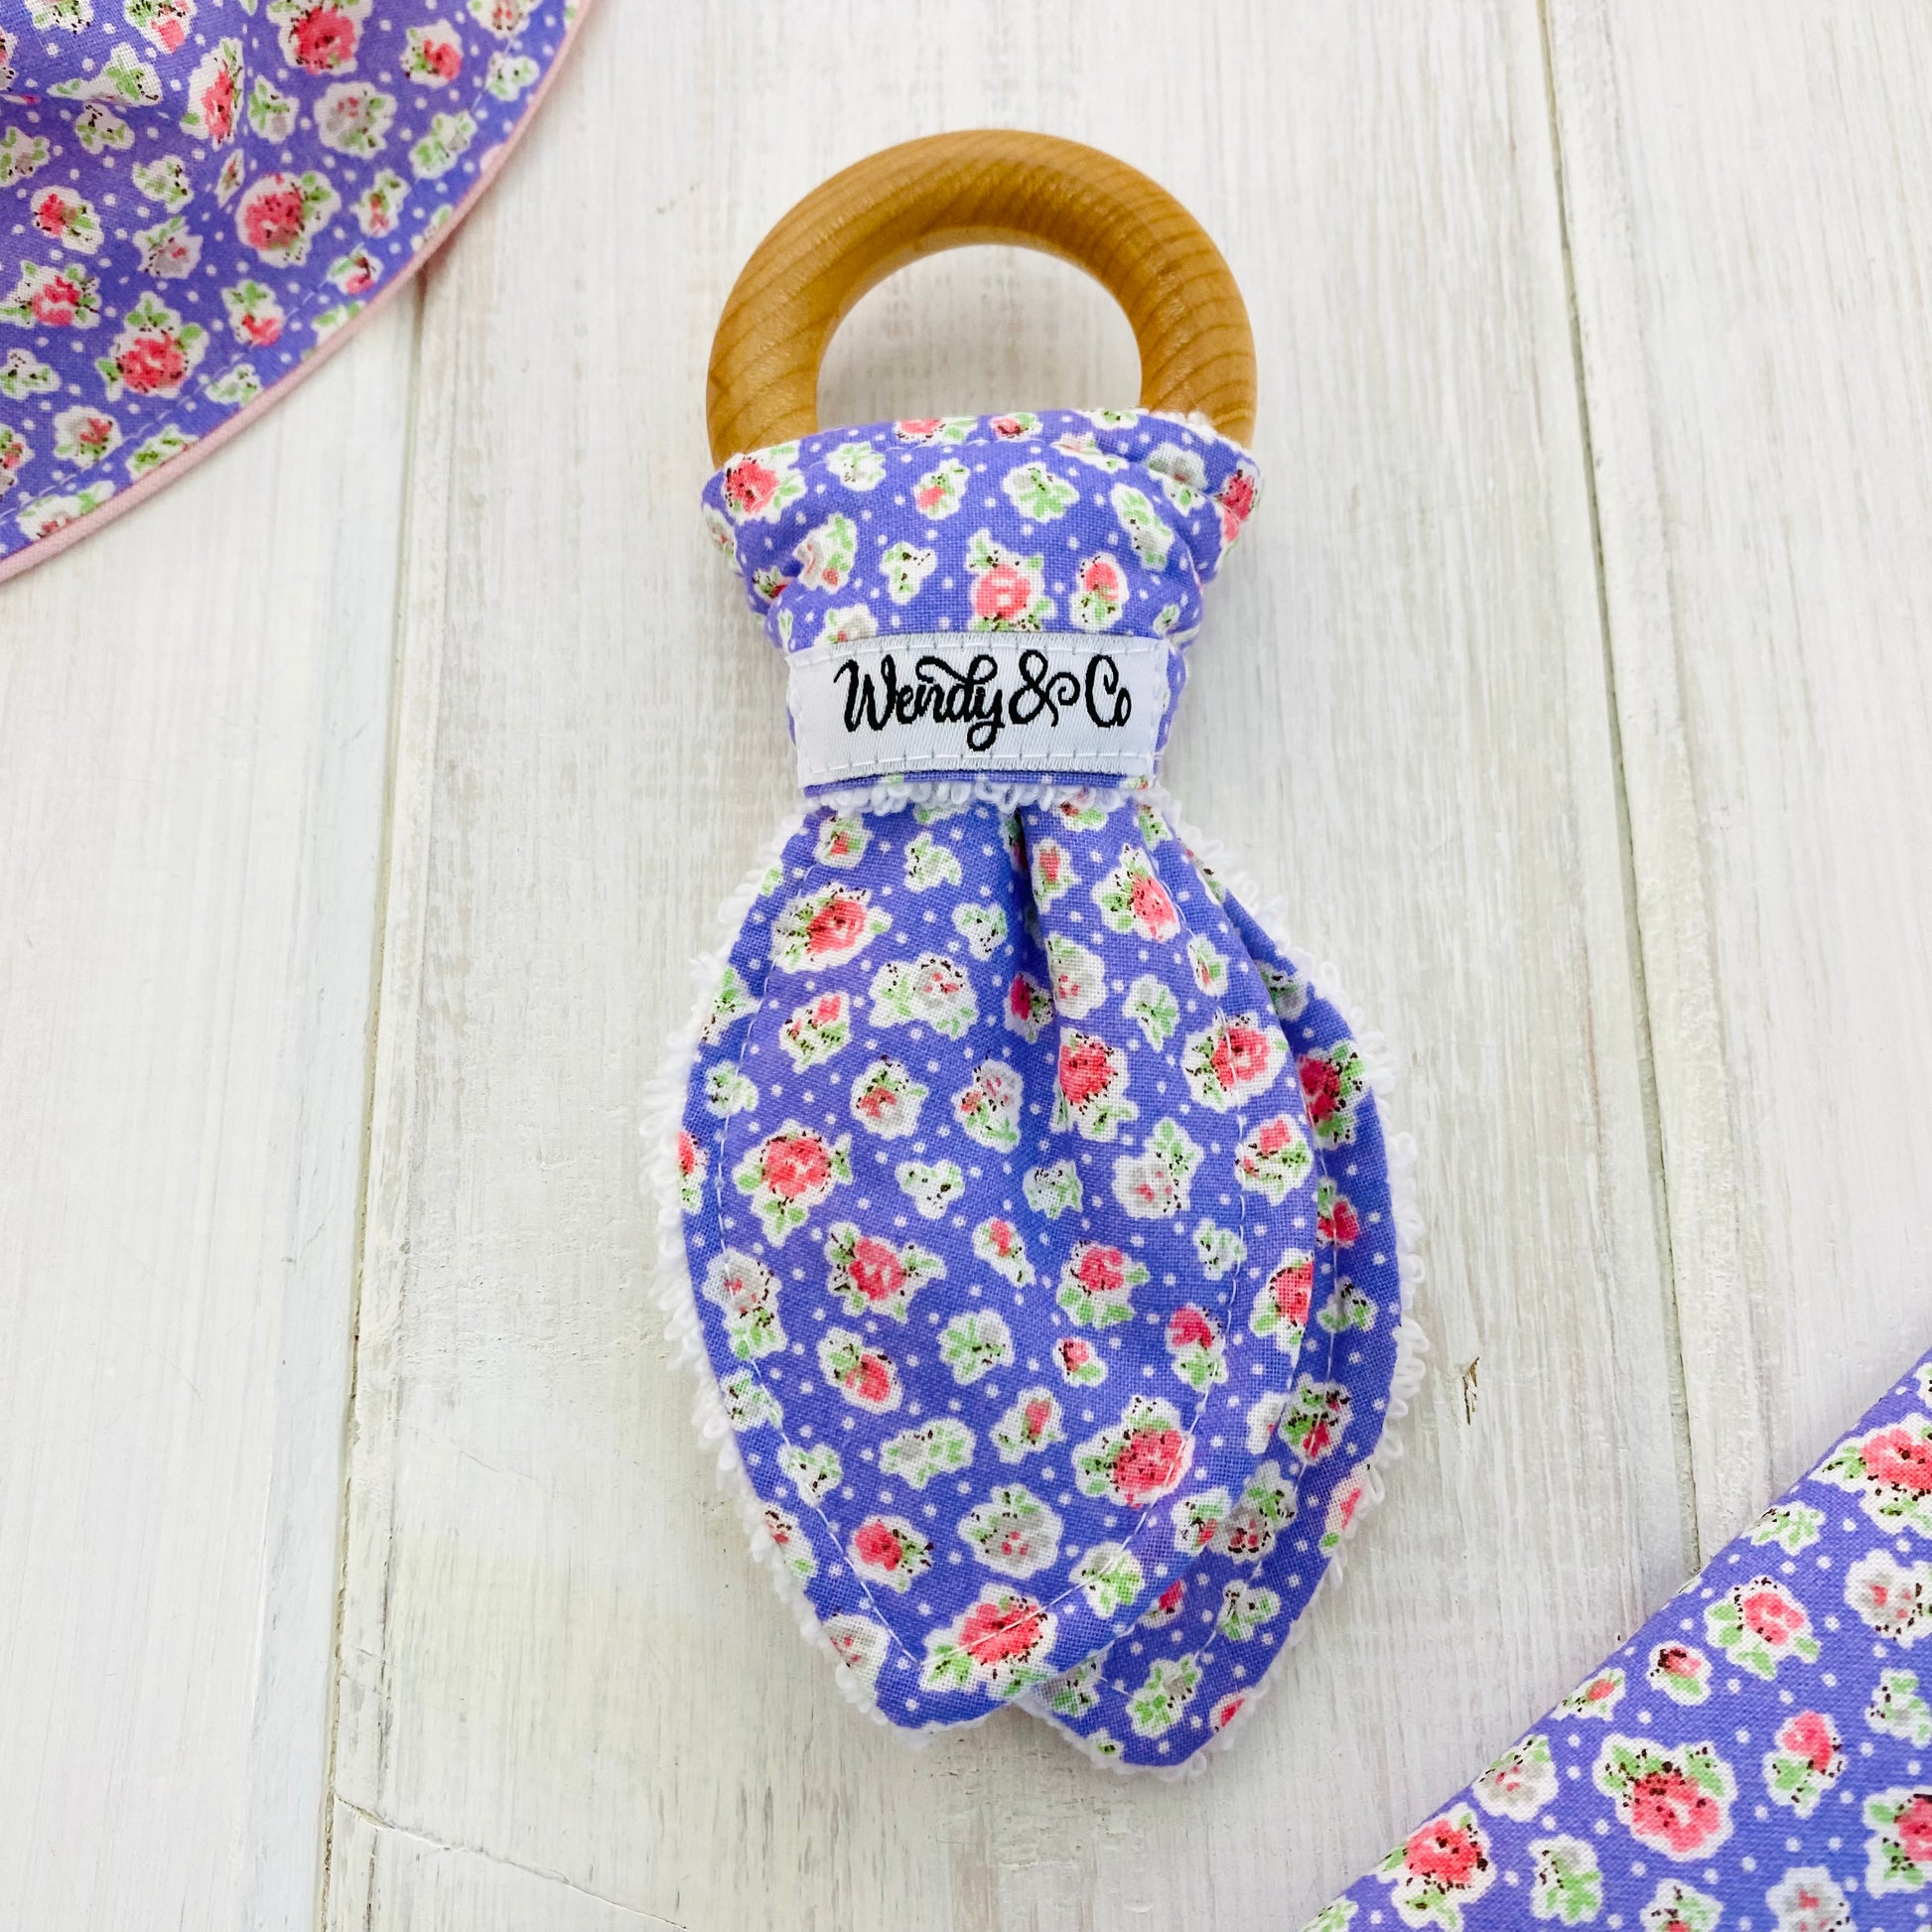 Lilac floral print handmade baby teether.